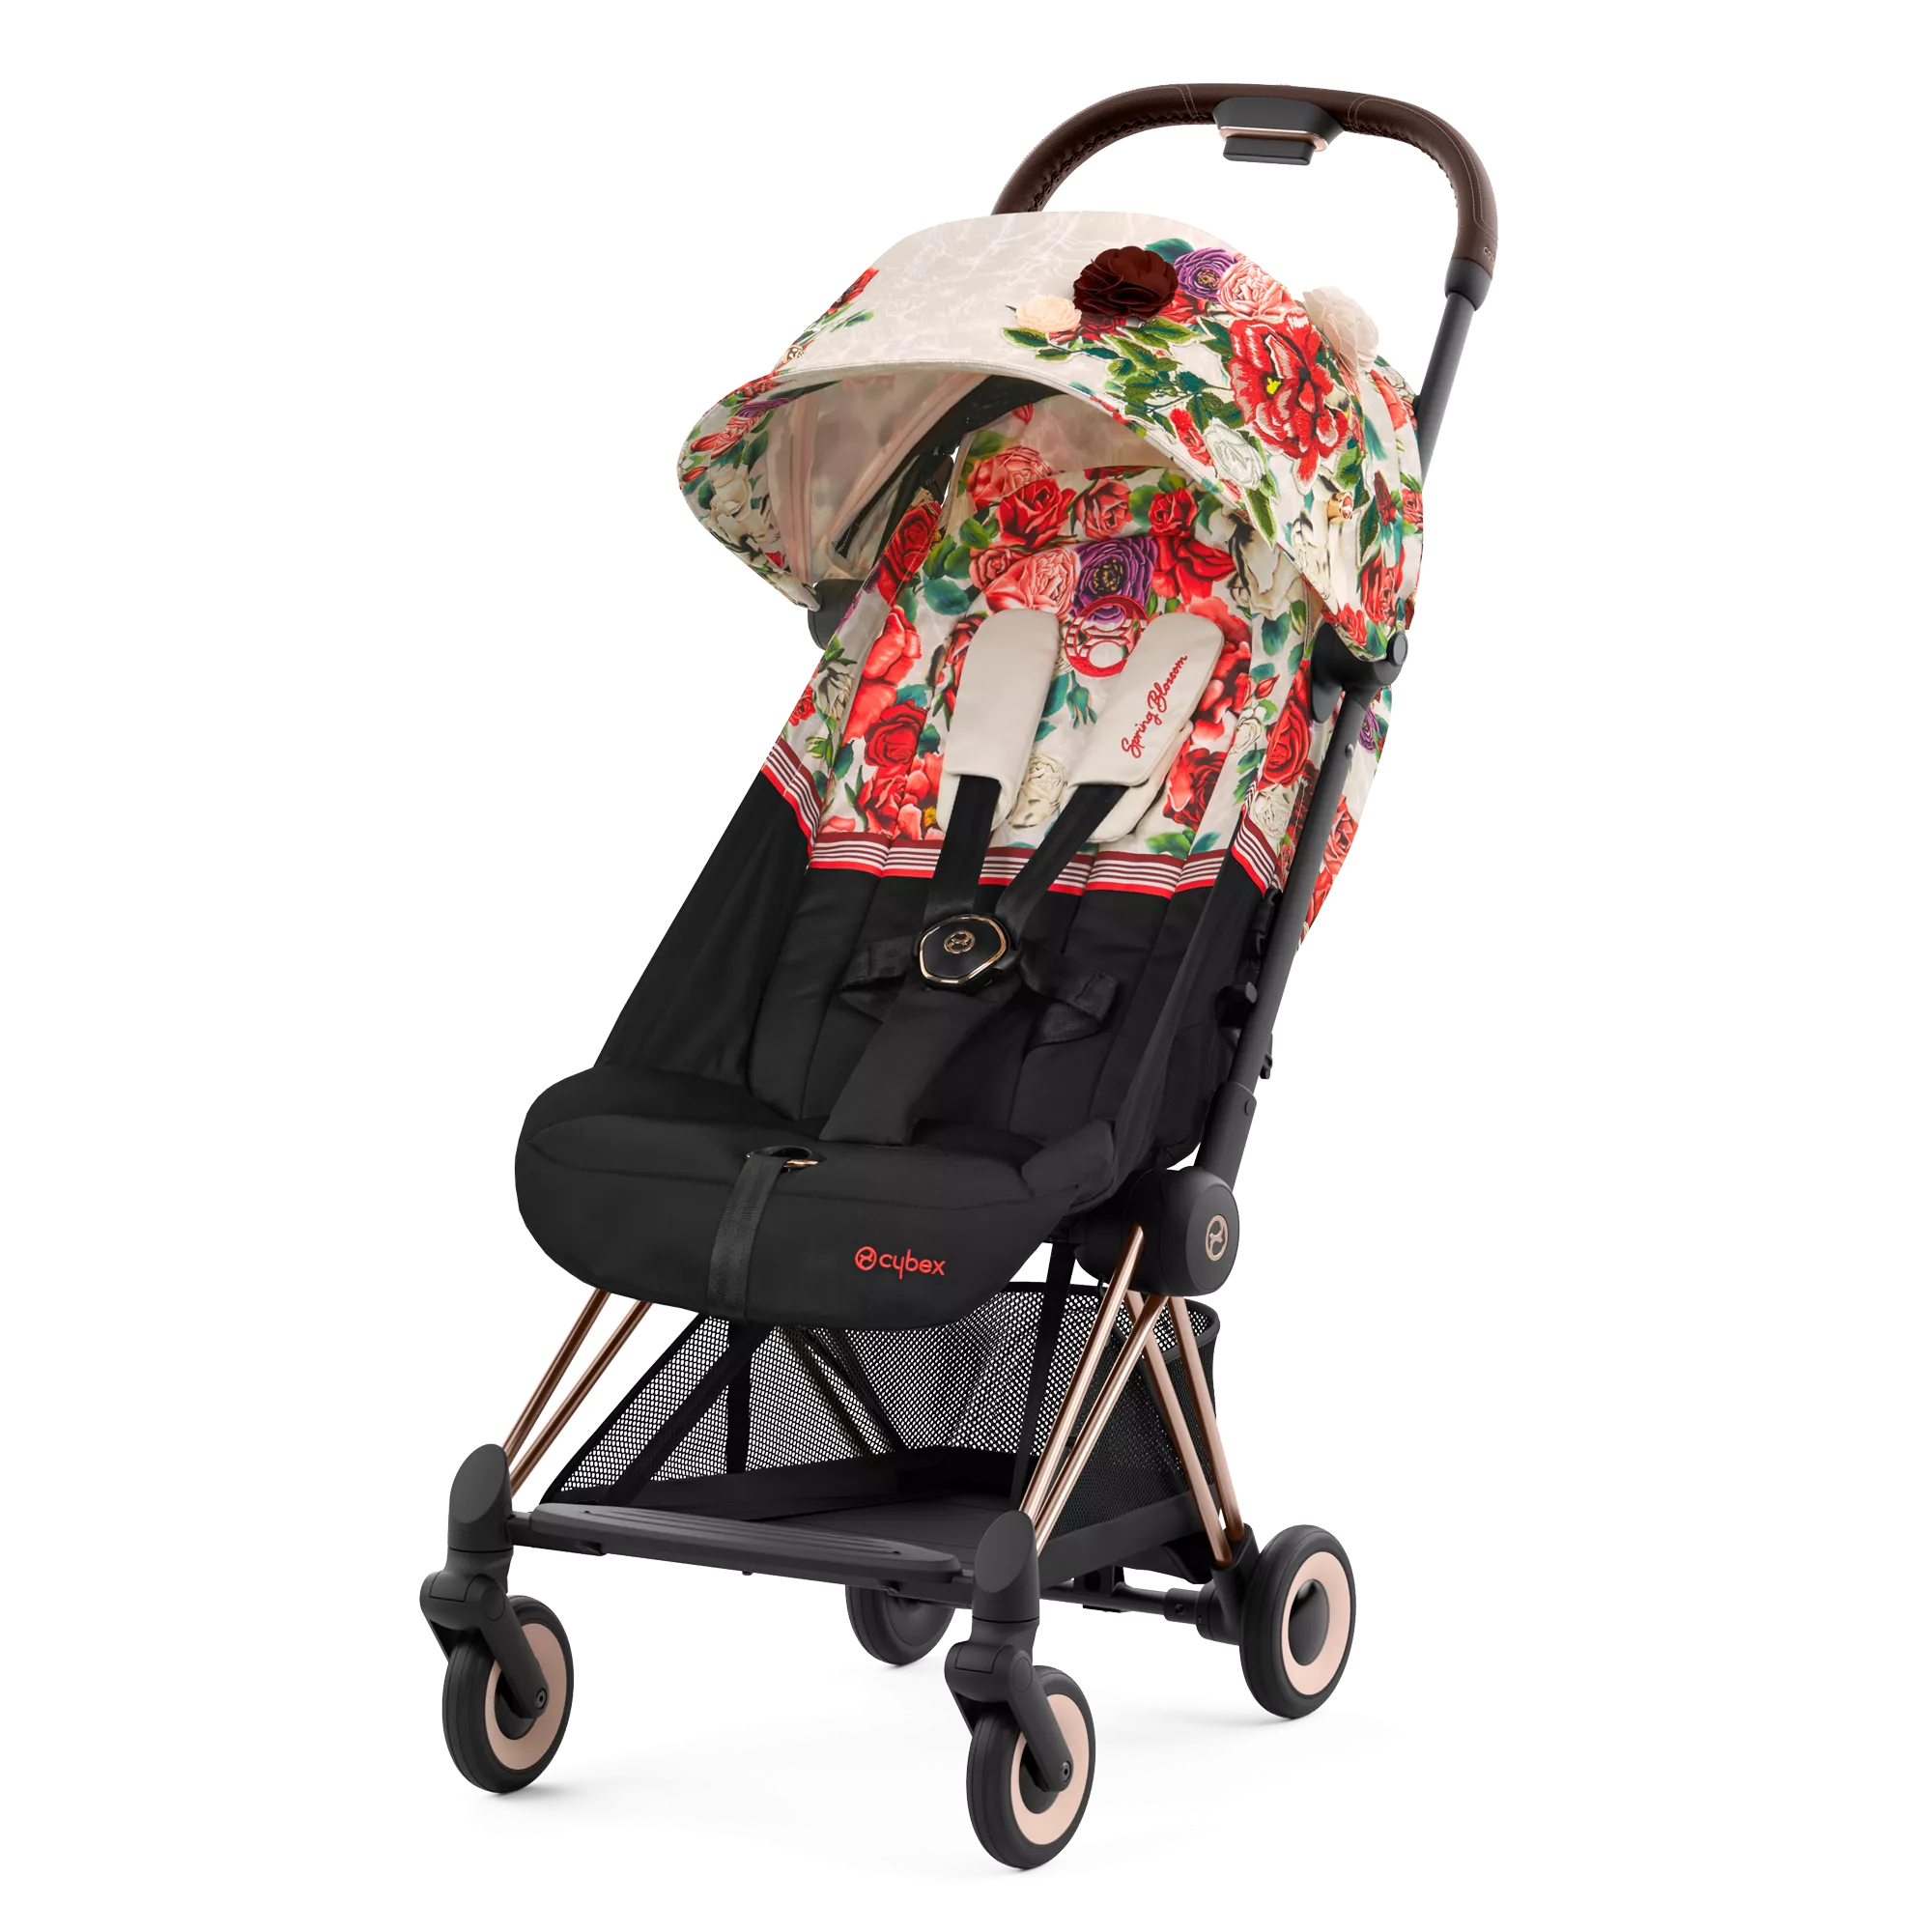 Cybex Coya | Spring Blossom - Fashion Collection